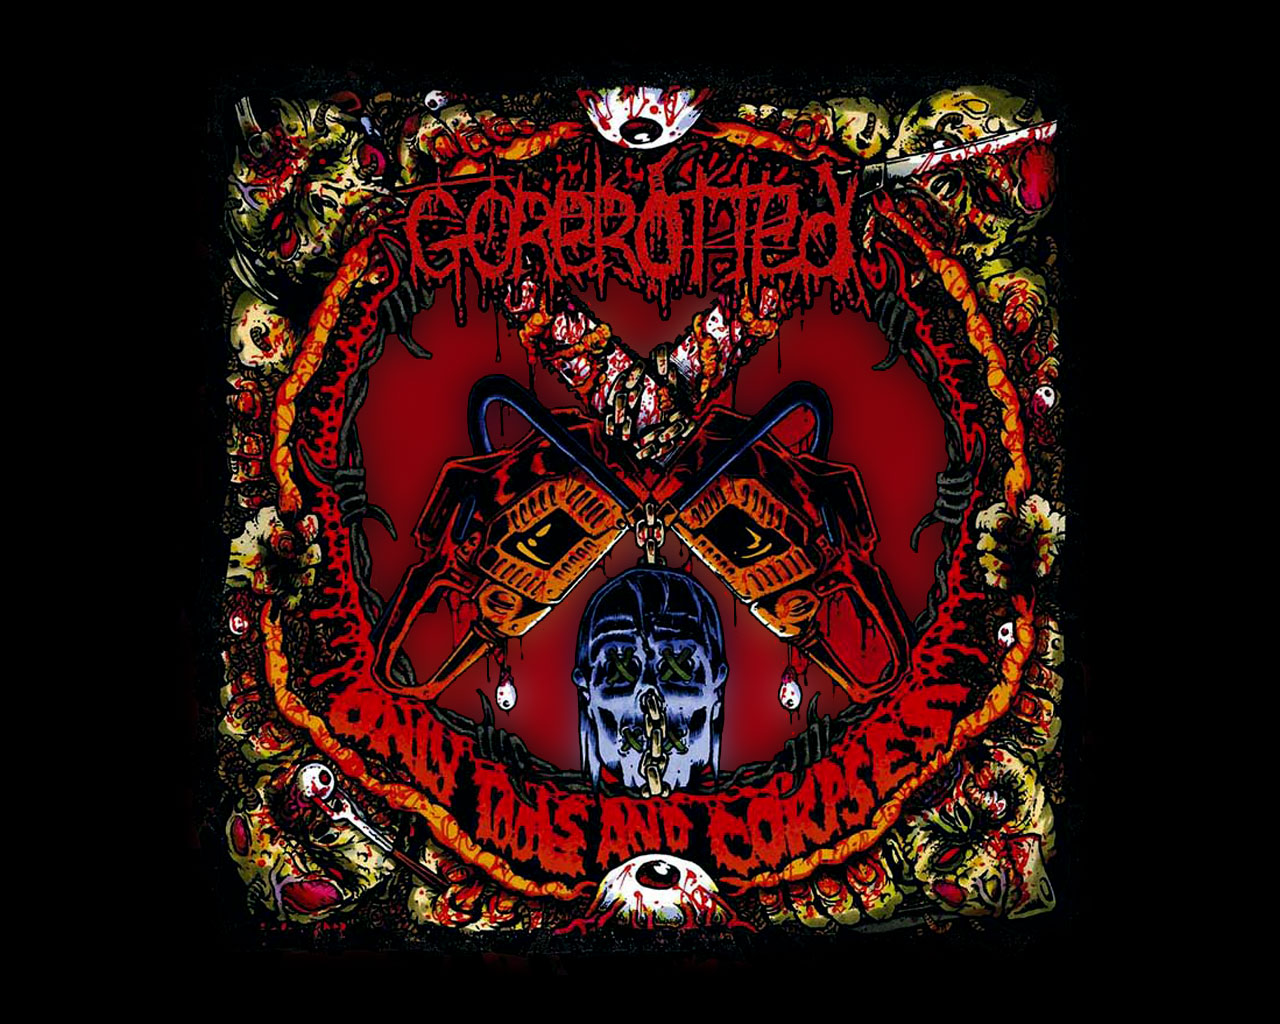 gorerotted